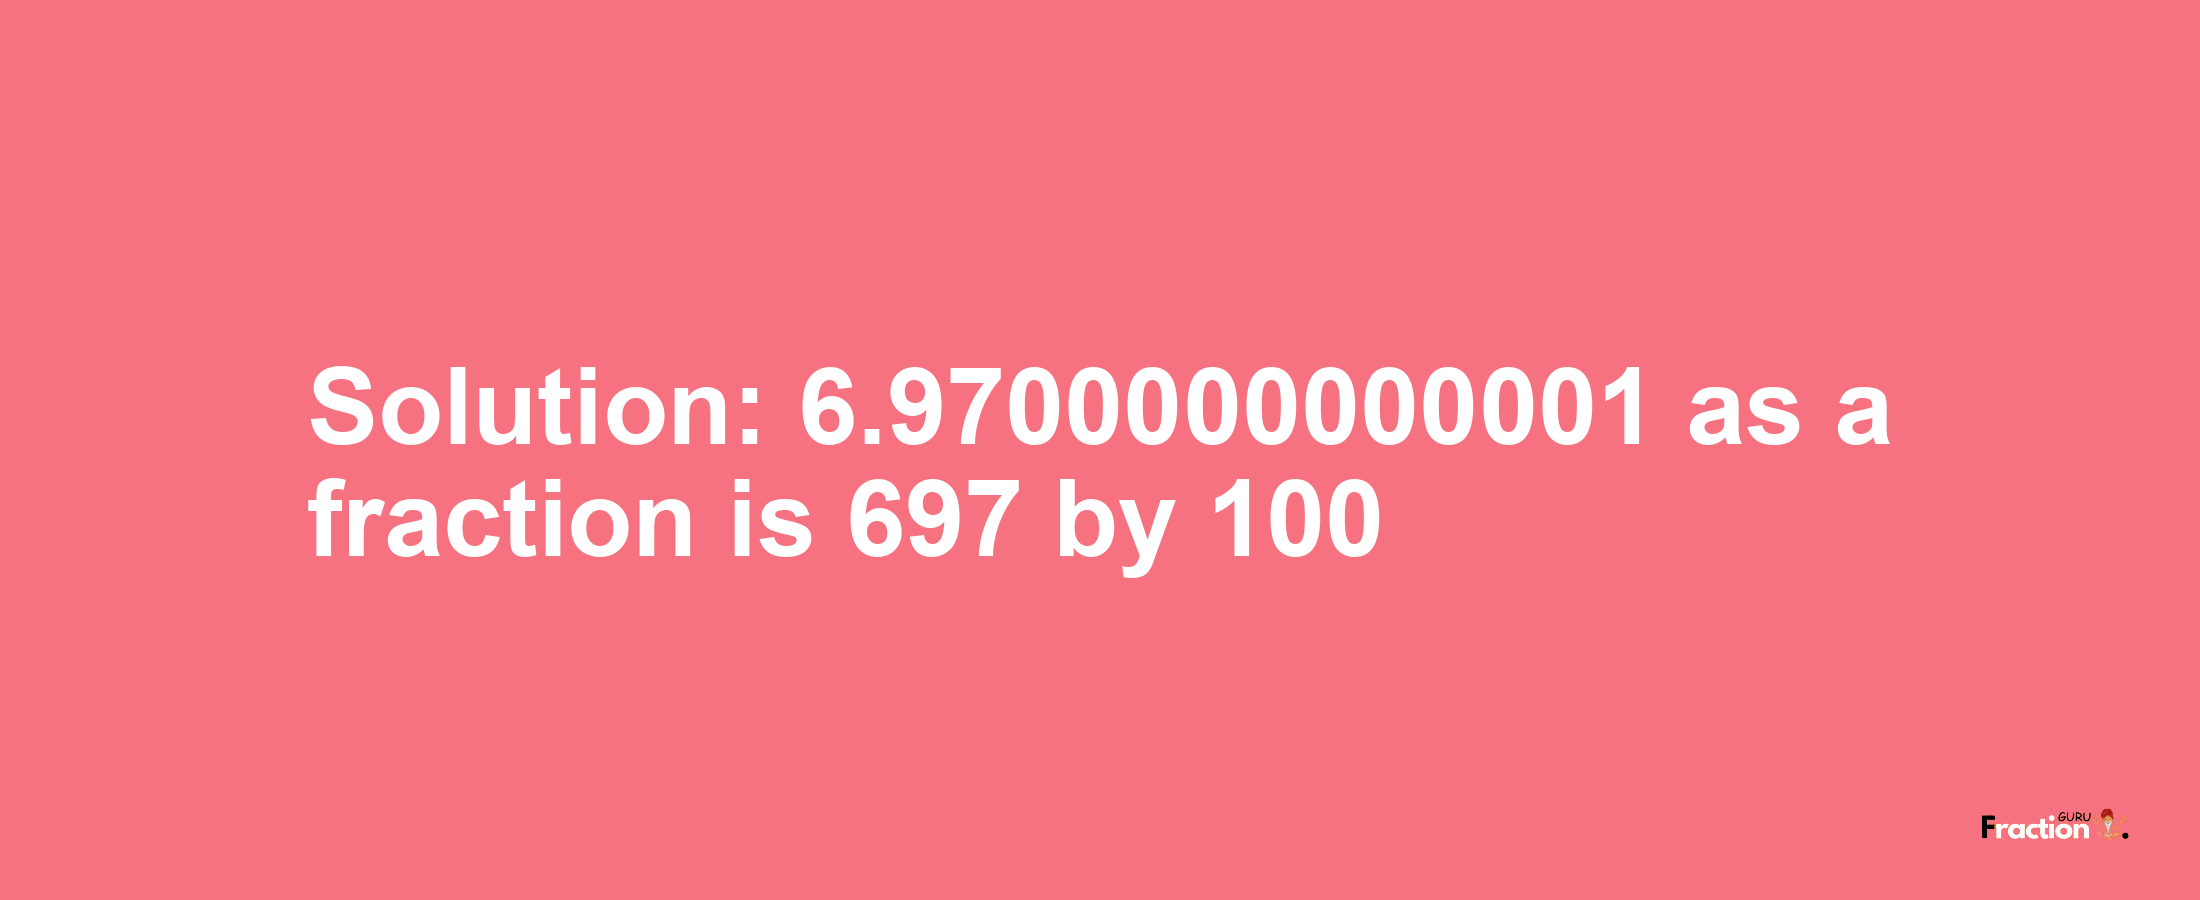 Solution:6.9700000000001 as a fraction is 697/100